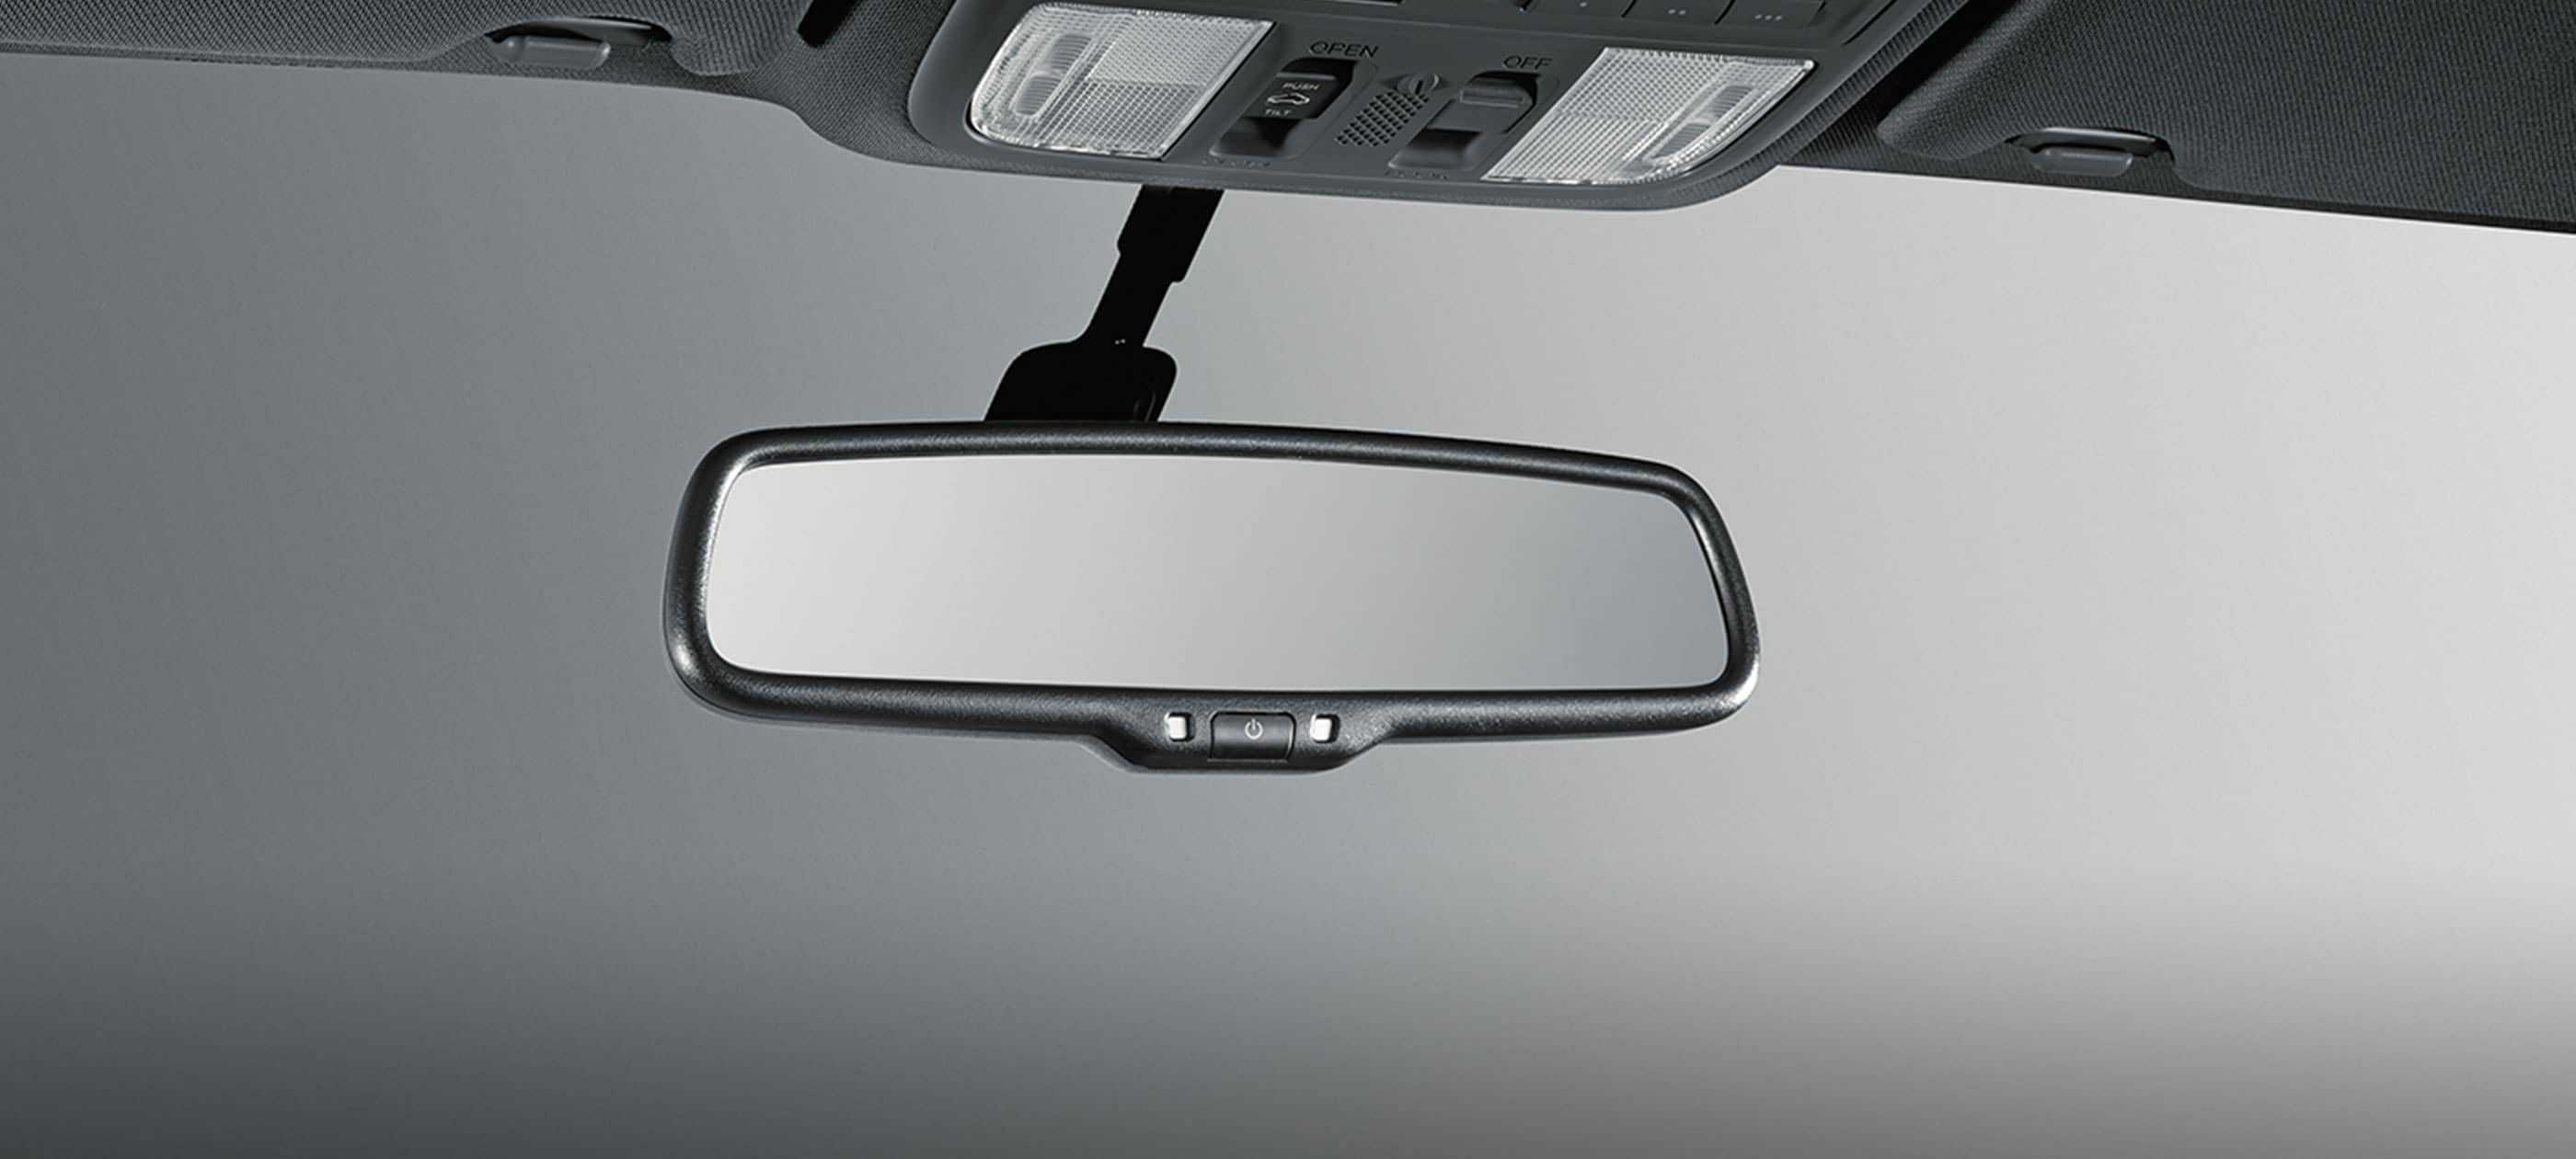 Honda Accord Automatic Dimming Mirror Fort Worth